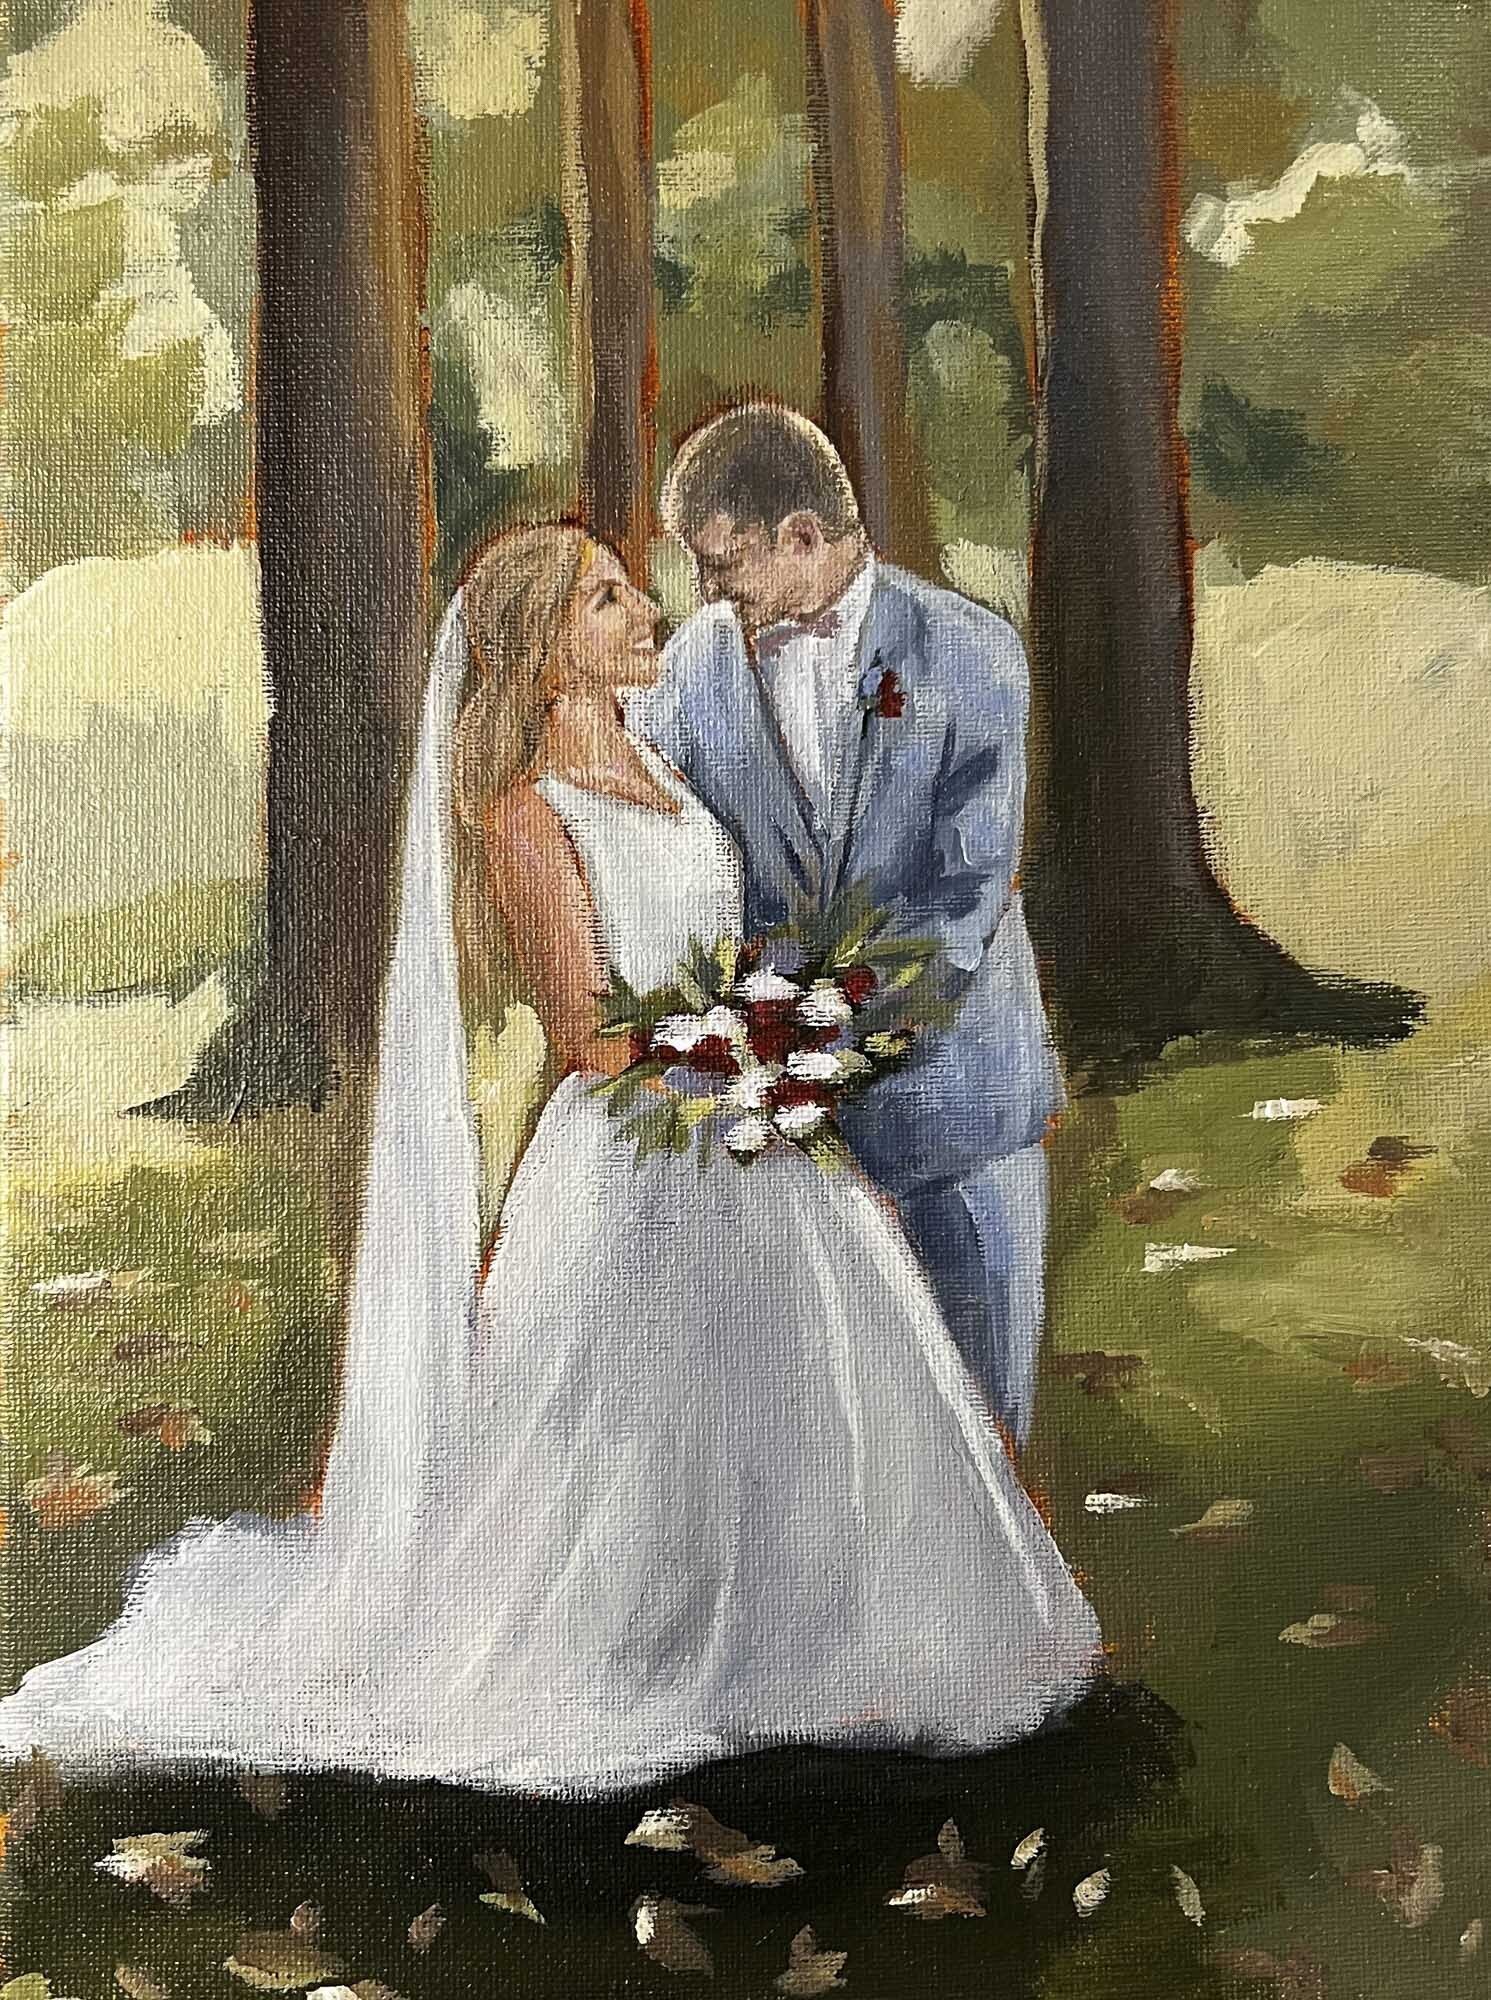 Bride and groom embracing outside under trees